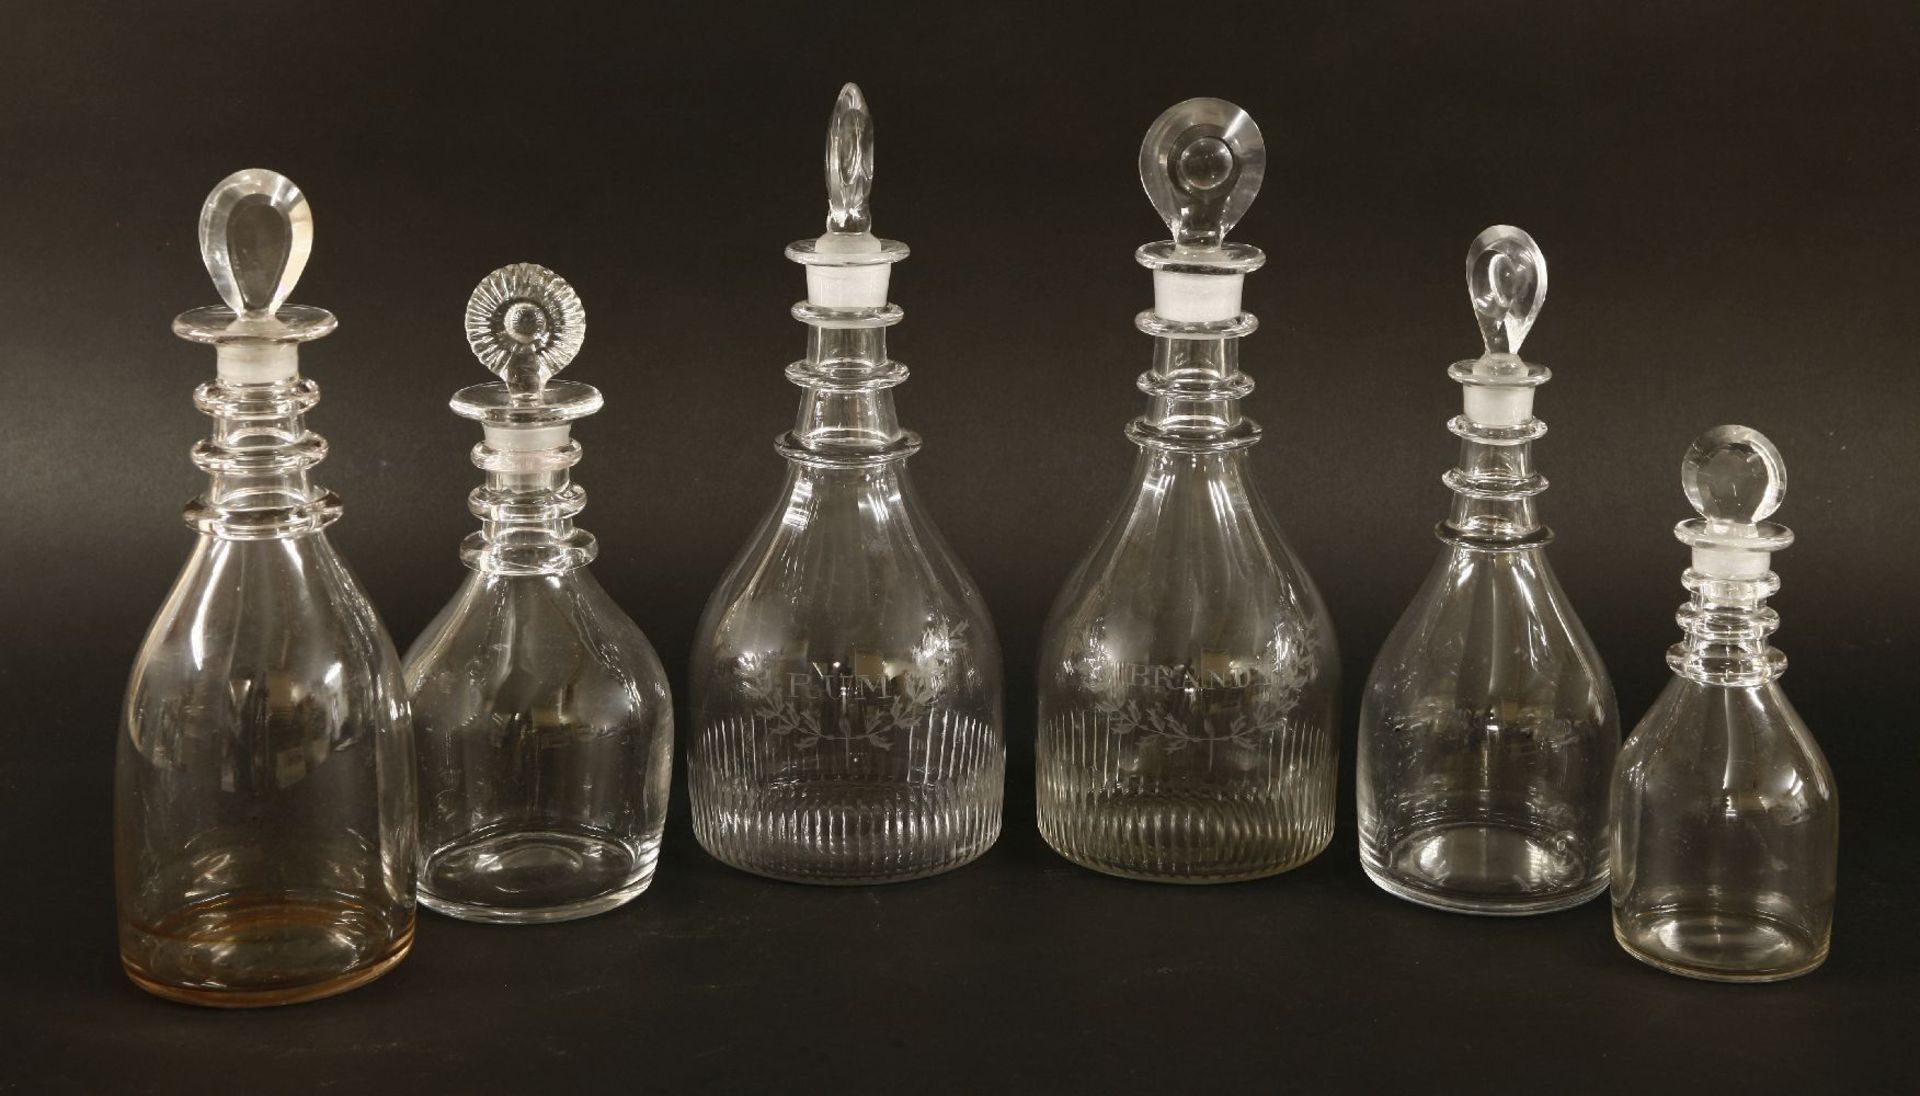 A pair of George III decanters and stoppers,with bullseye stoppers and mallet-shaped bodies engraved